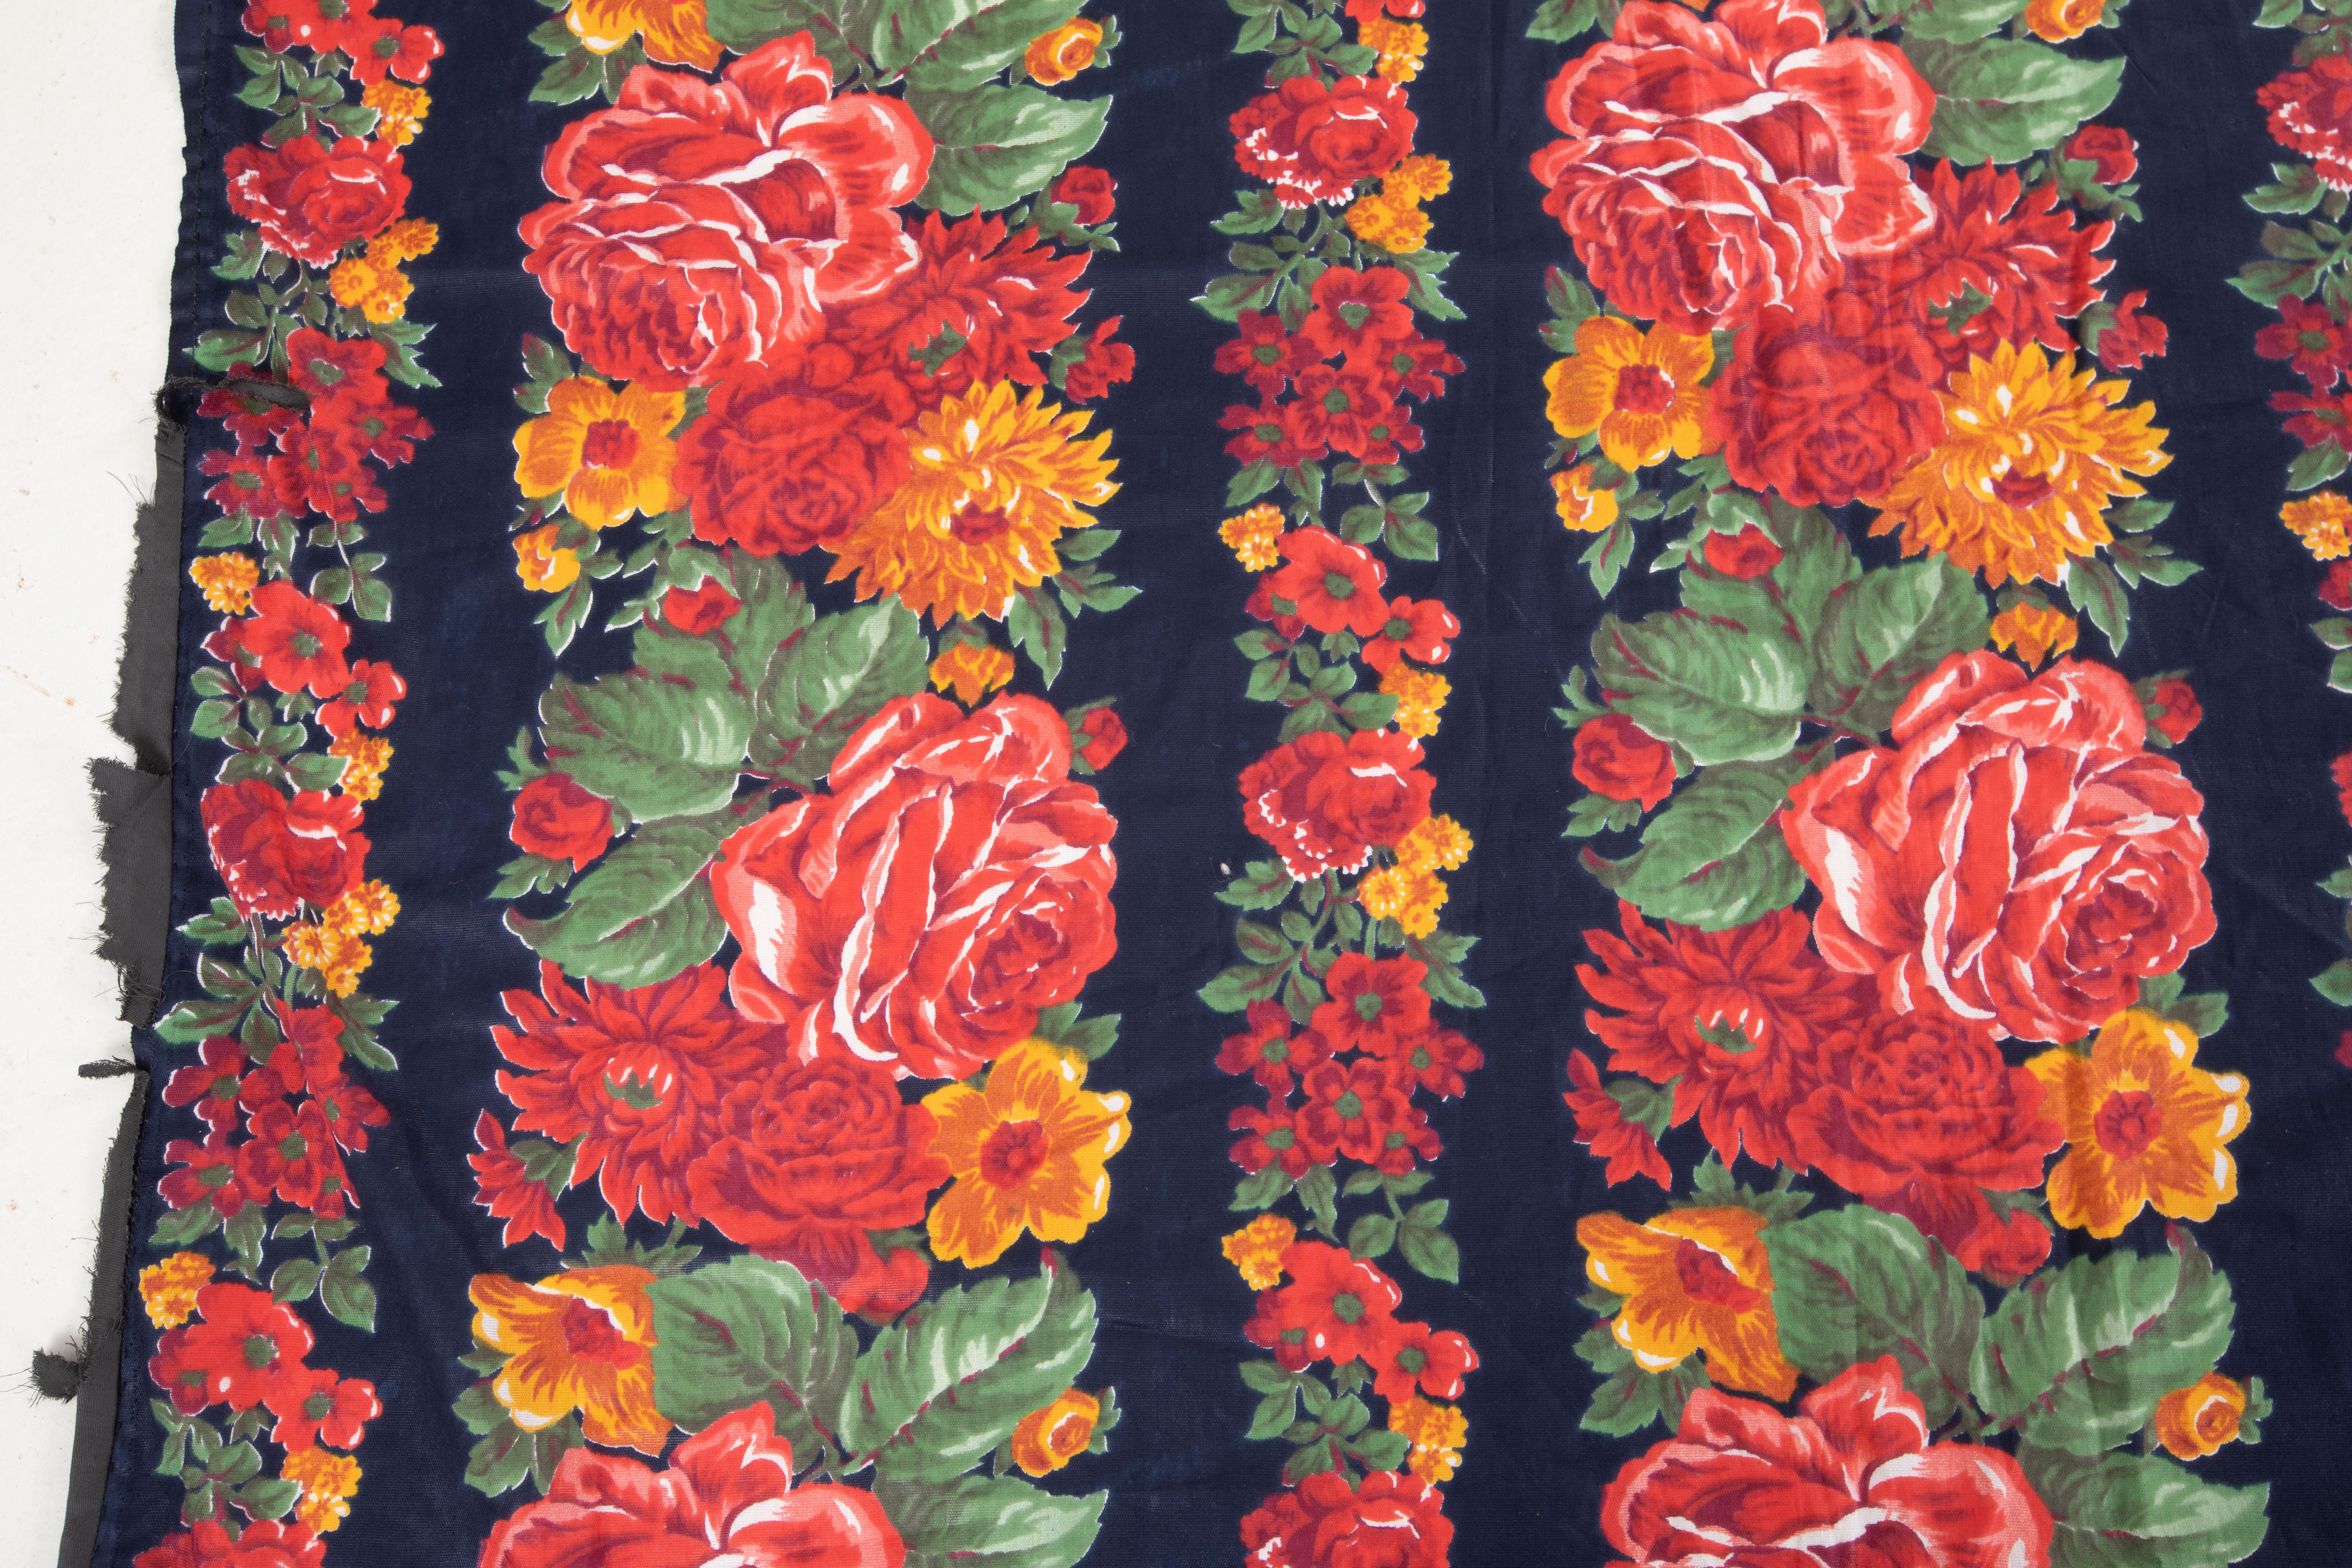 Russian Roller Printed Cotton Fabric Panel, Mid-20th Century or Earlier For Sale 4